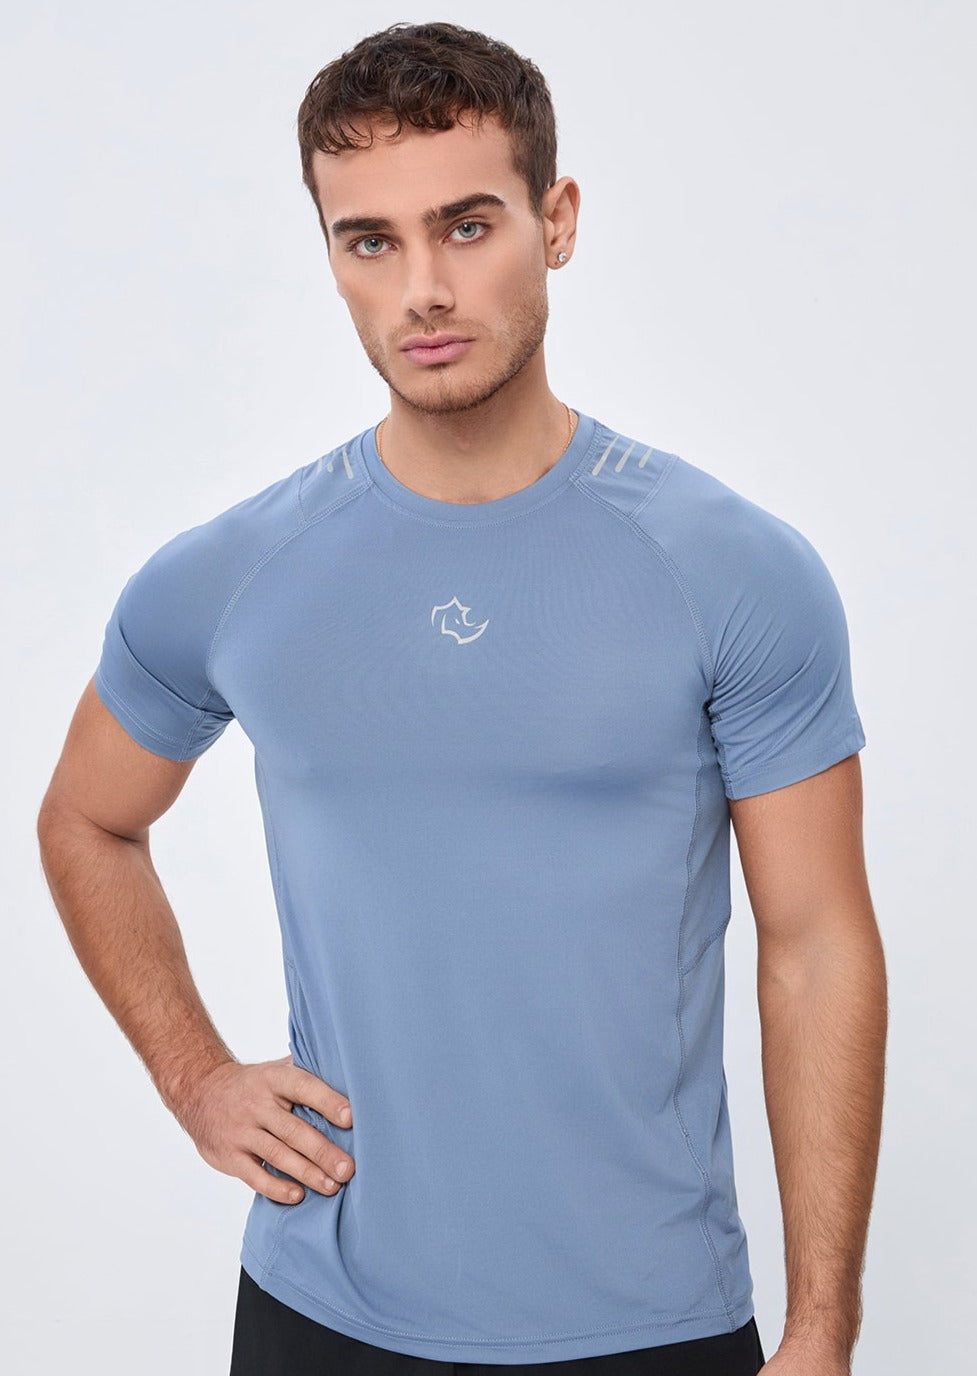 COMPRESSION FIT Tshirts CORE TEE - STONE BLUE